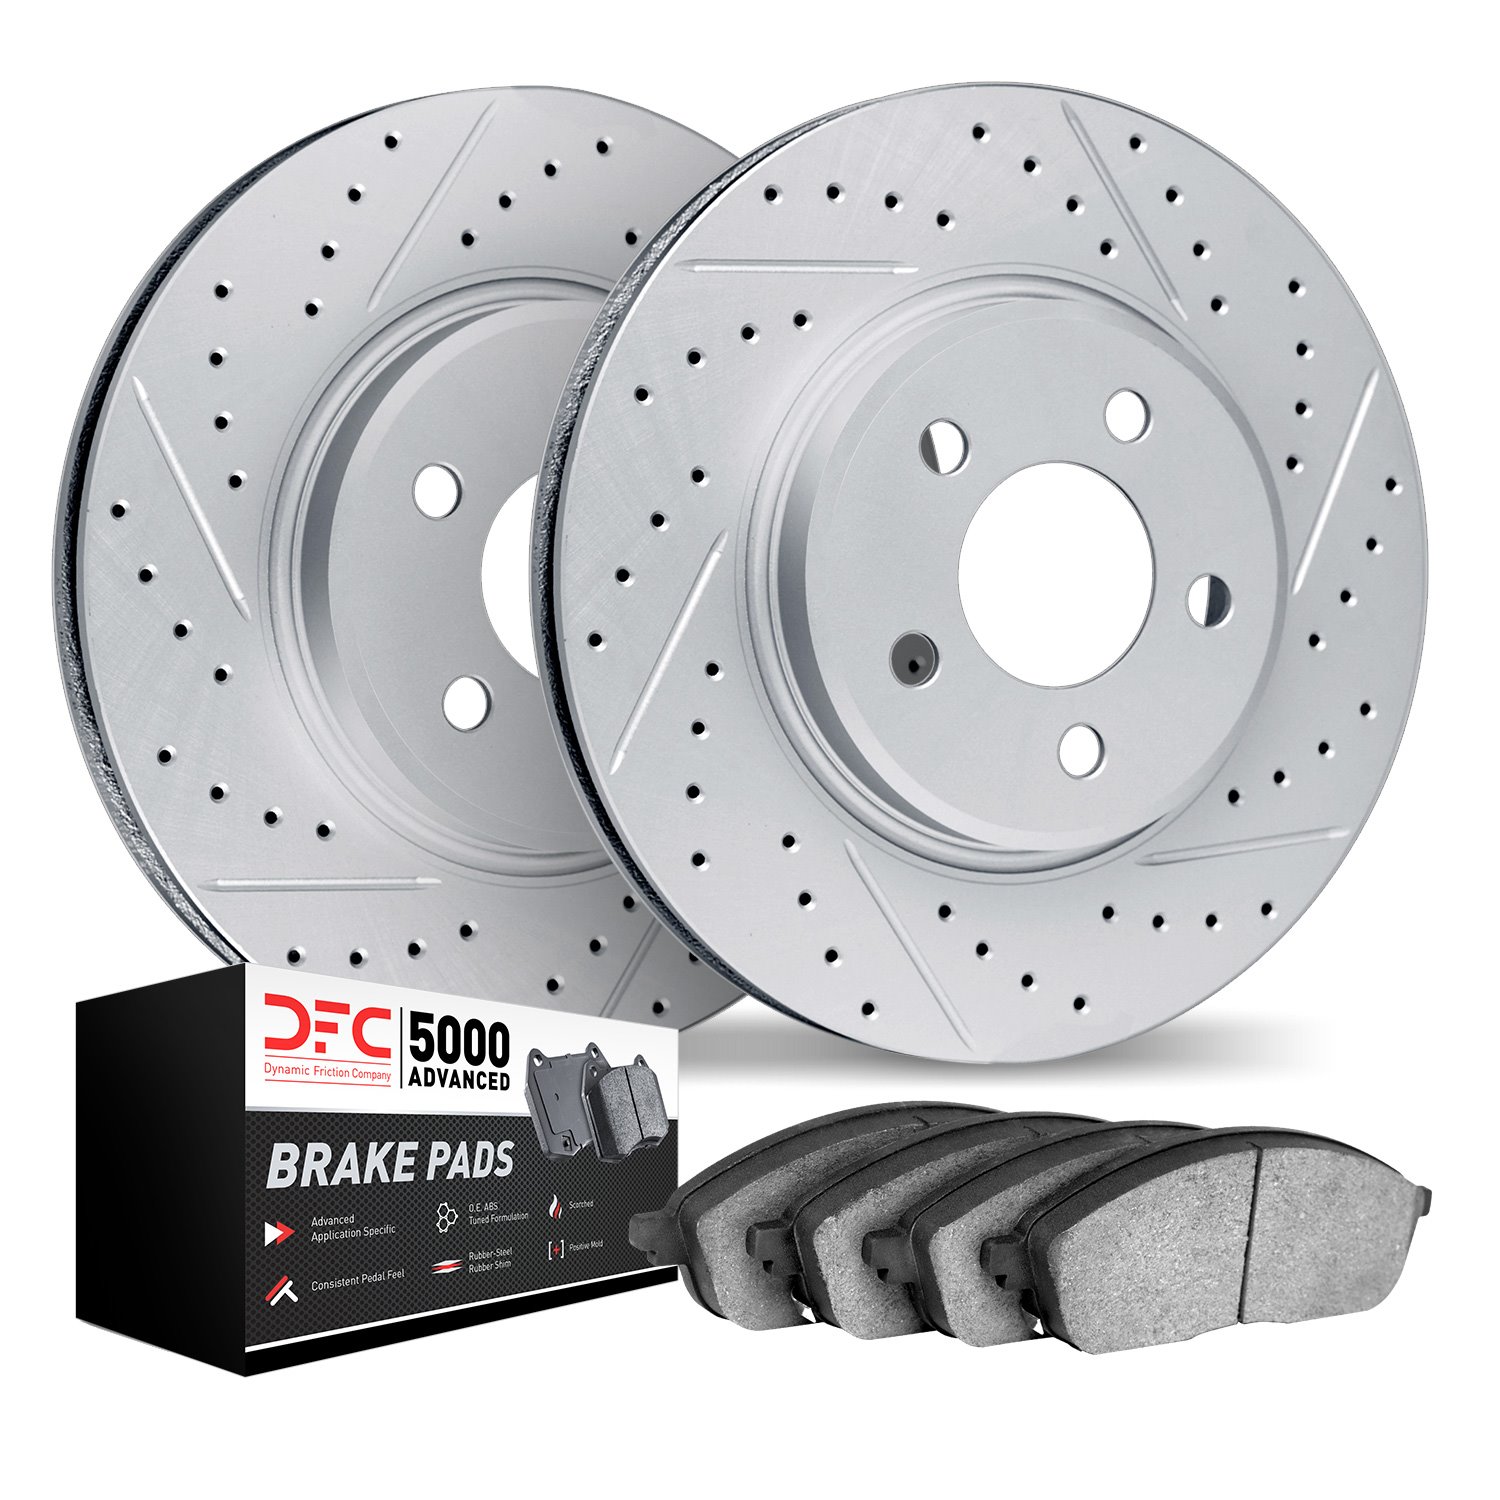 2502-31149 Geoperformance Drilled/Slotted Rotors w/5000 Advanced Brake Pads Kit, Fits Select BMW, Position: Front